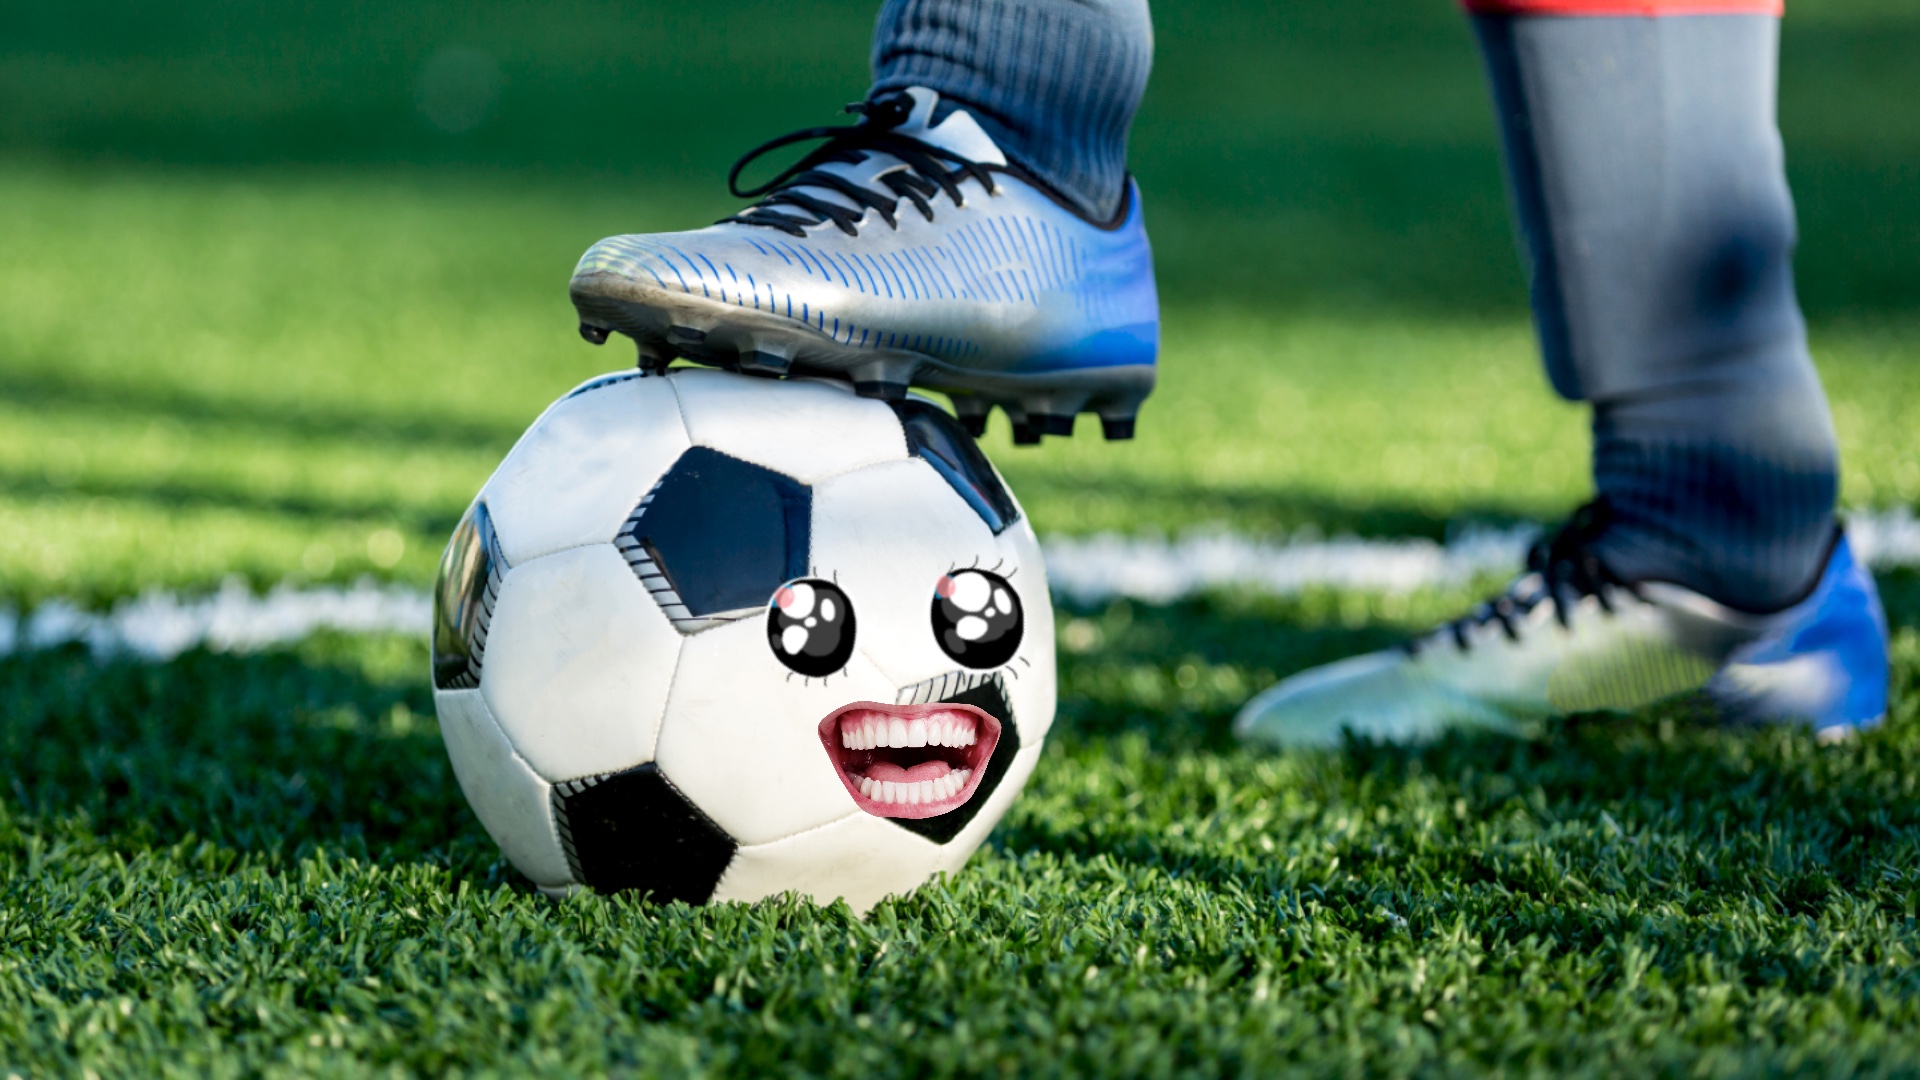 A football player rests their boot on a ball